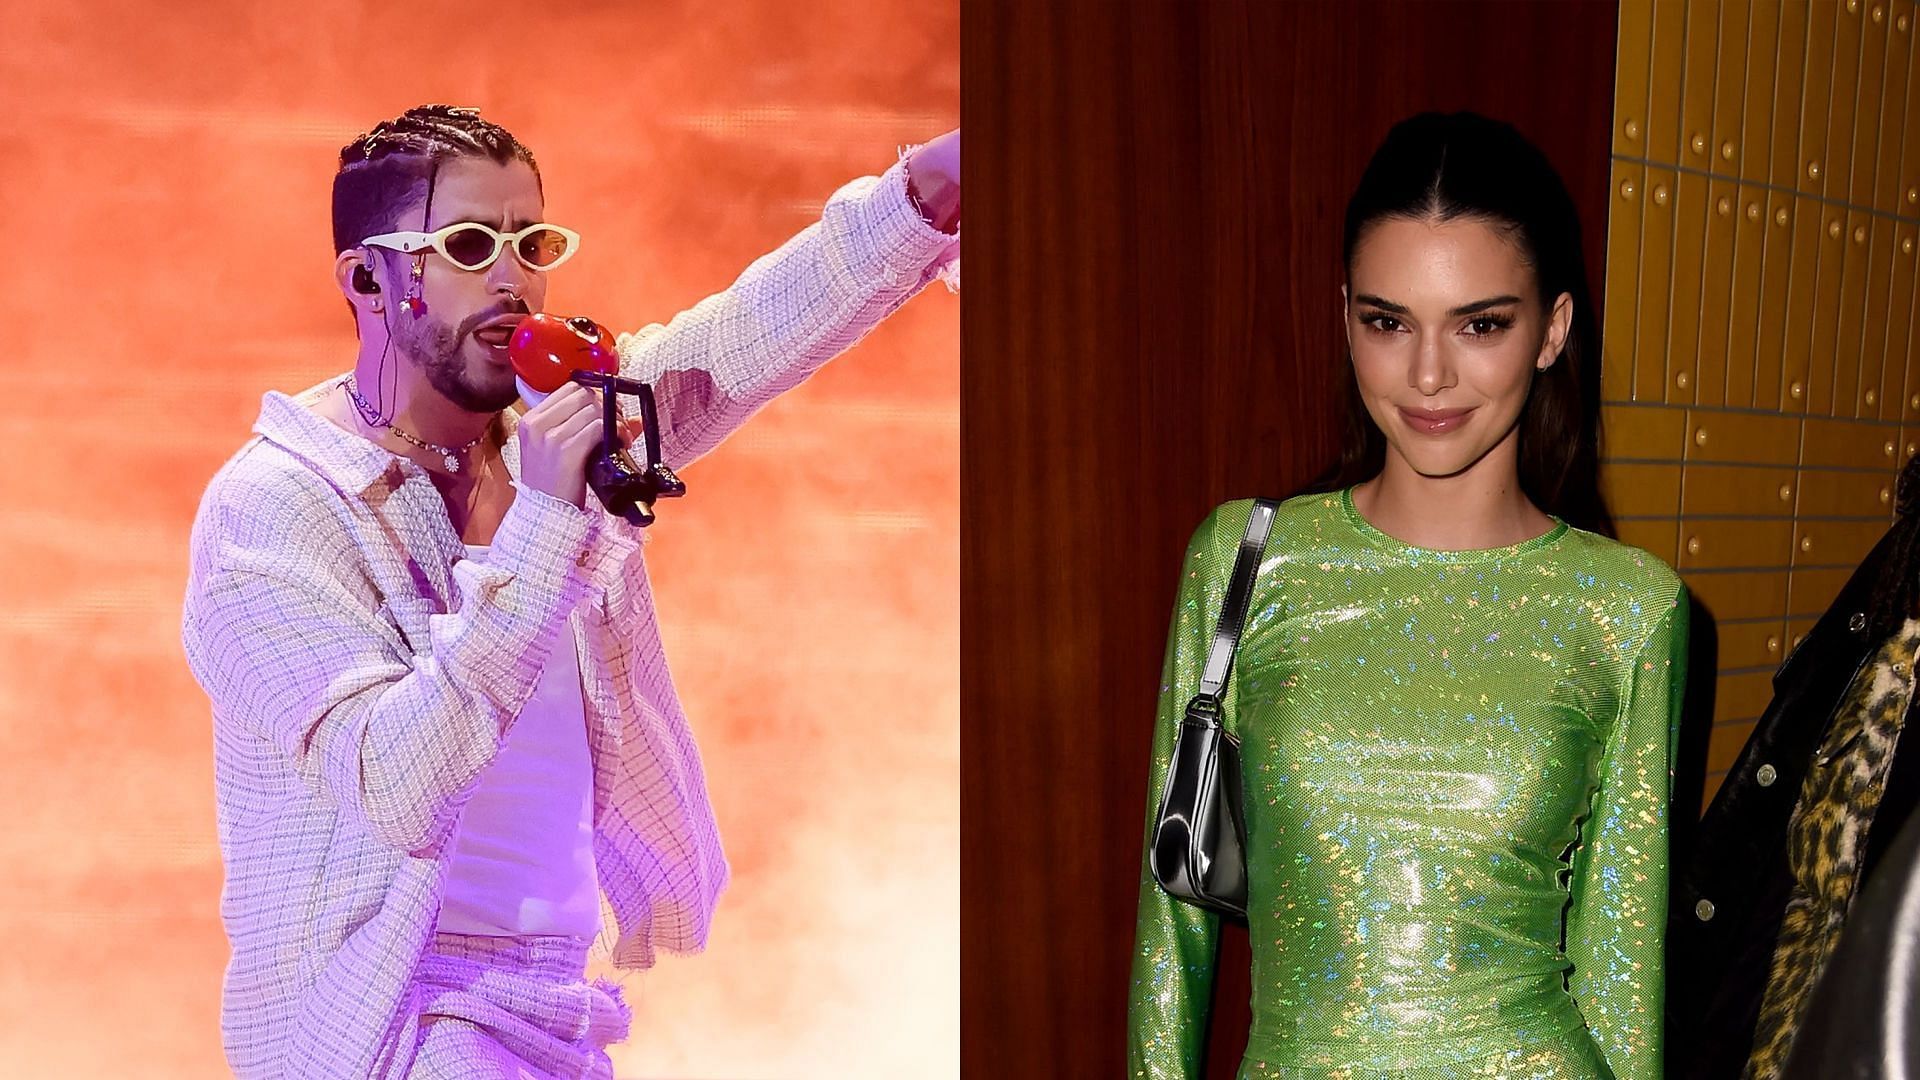 Kendall Jenner and Bad Bunny spark dating rumors (Image via Getty Images)